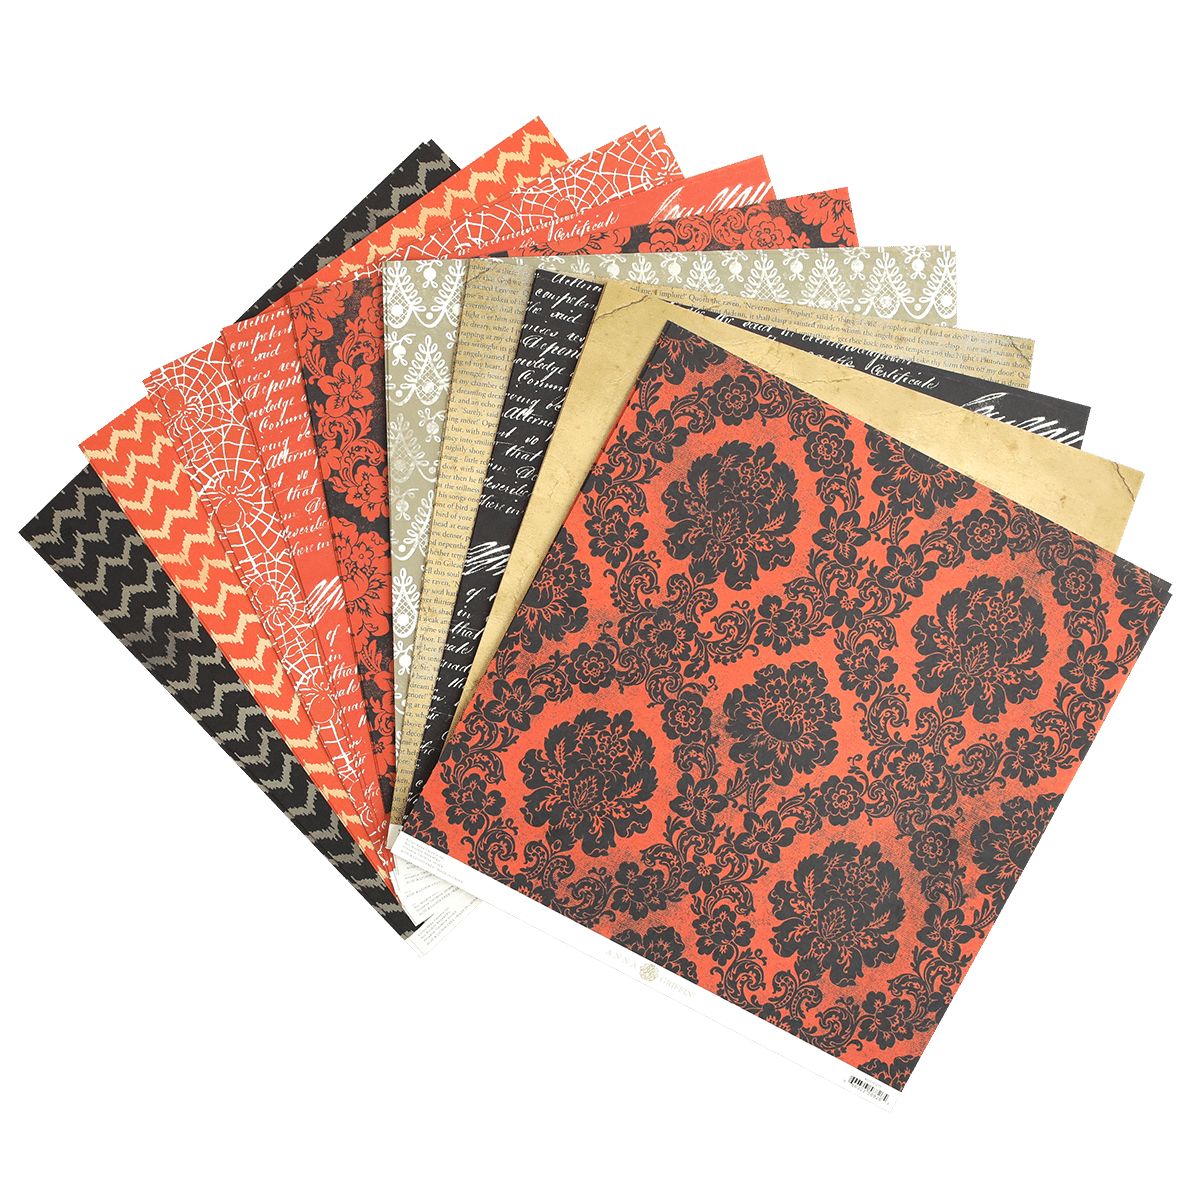 A collection of Spooktacular Halloween 12x12 Cardstock with black and orange designs.